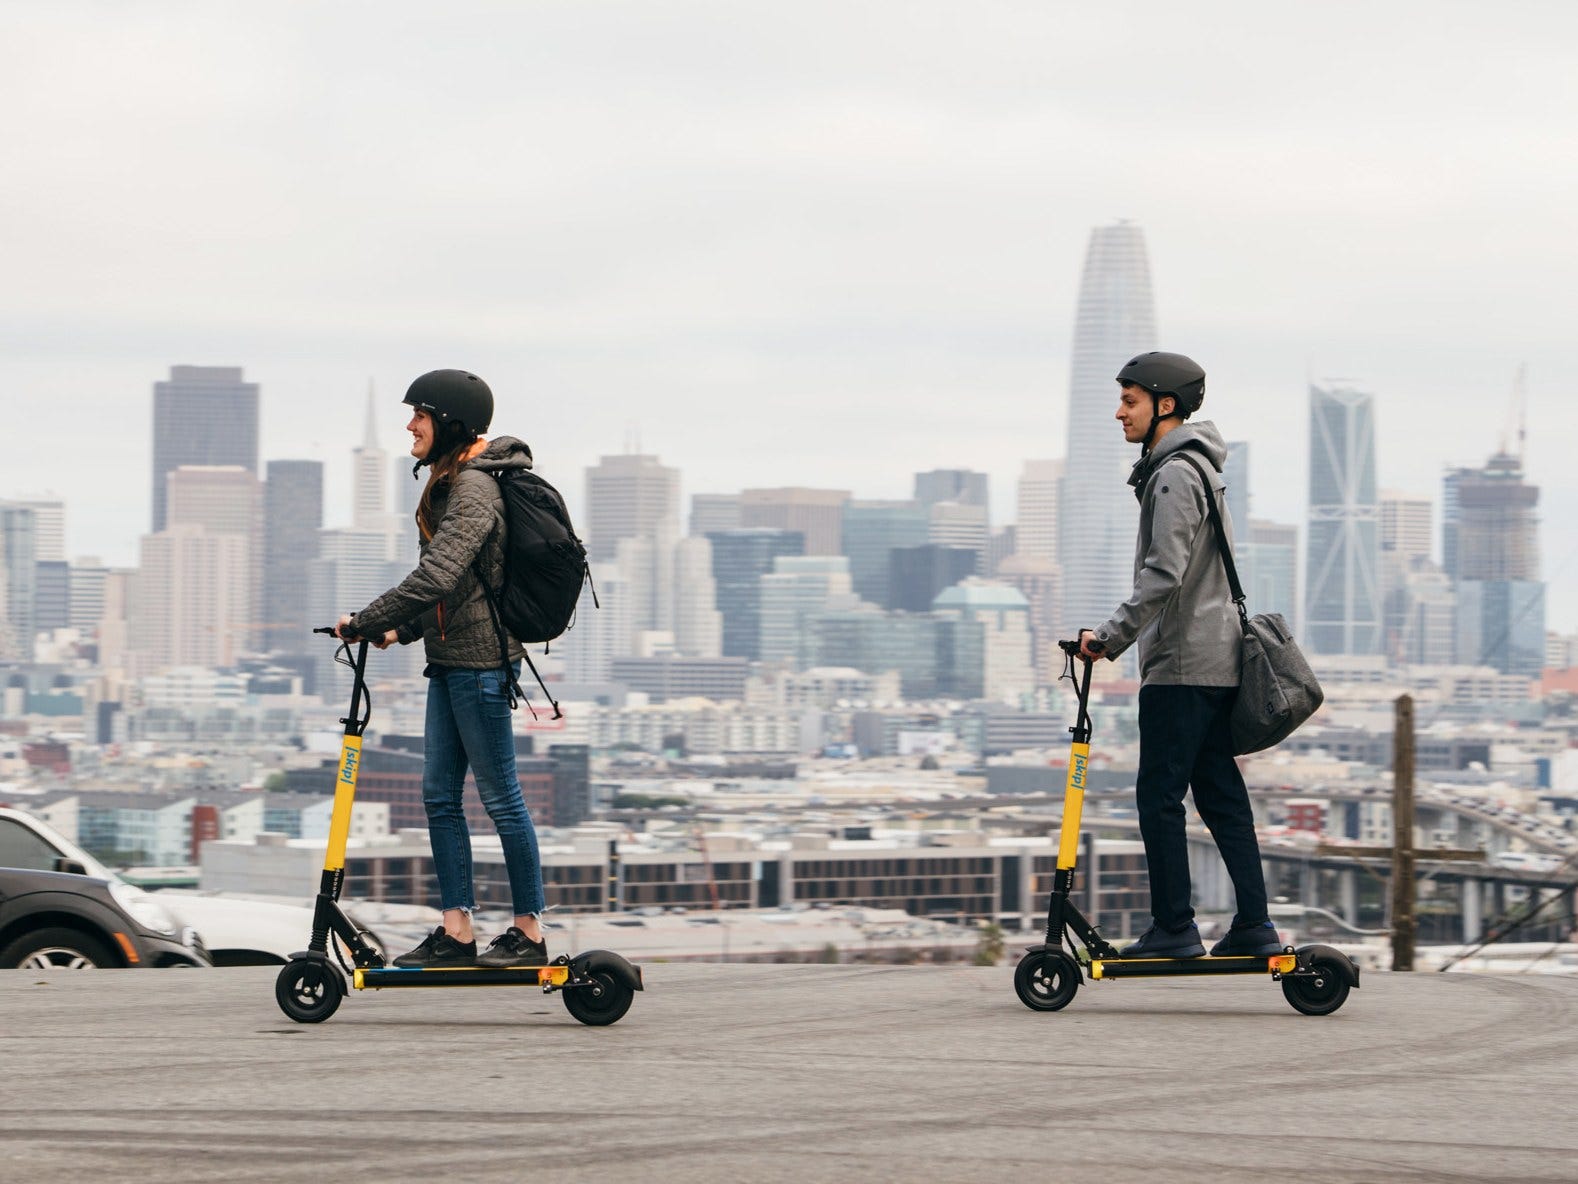 Launch of the new BMW E-Scooter from autumn 2019.